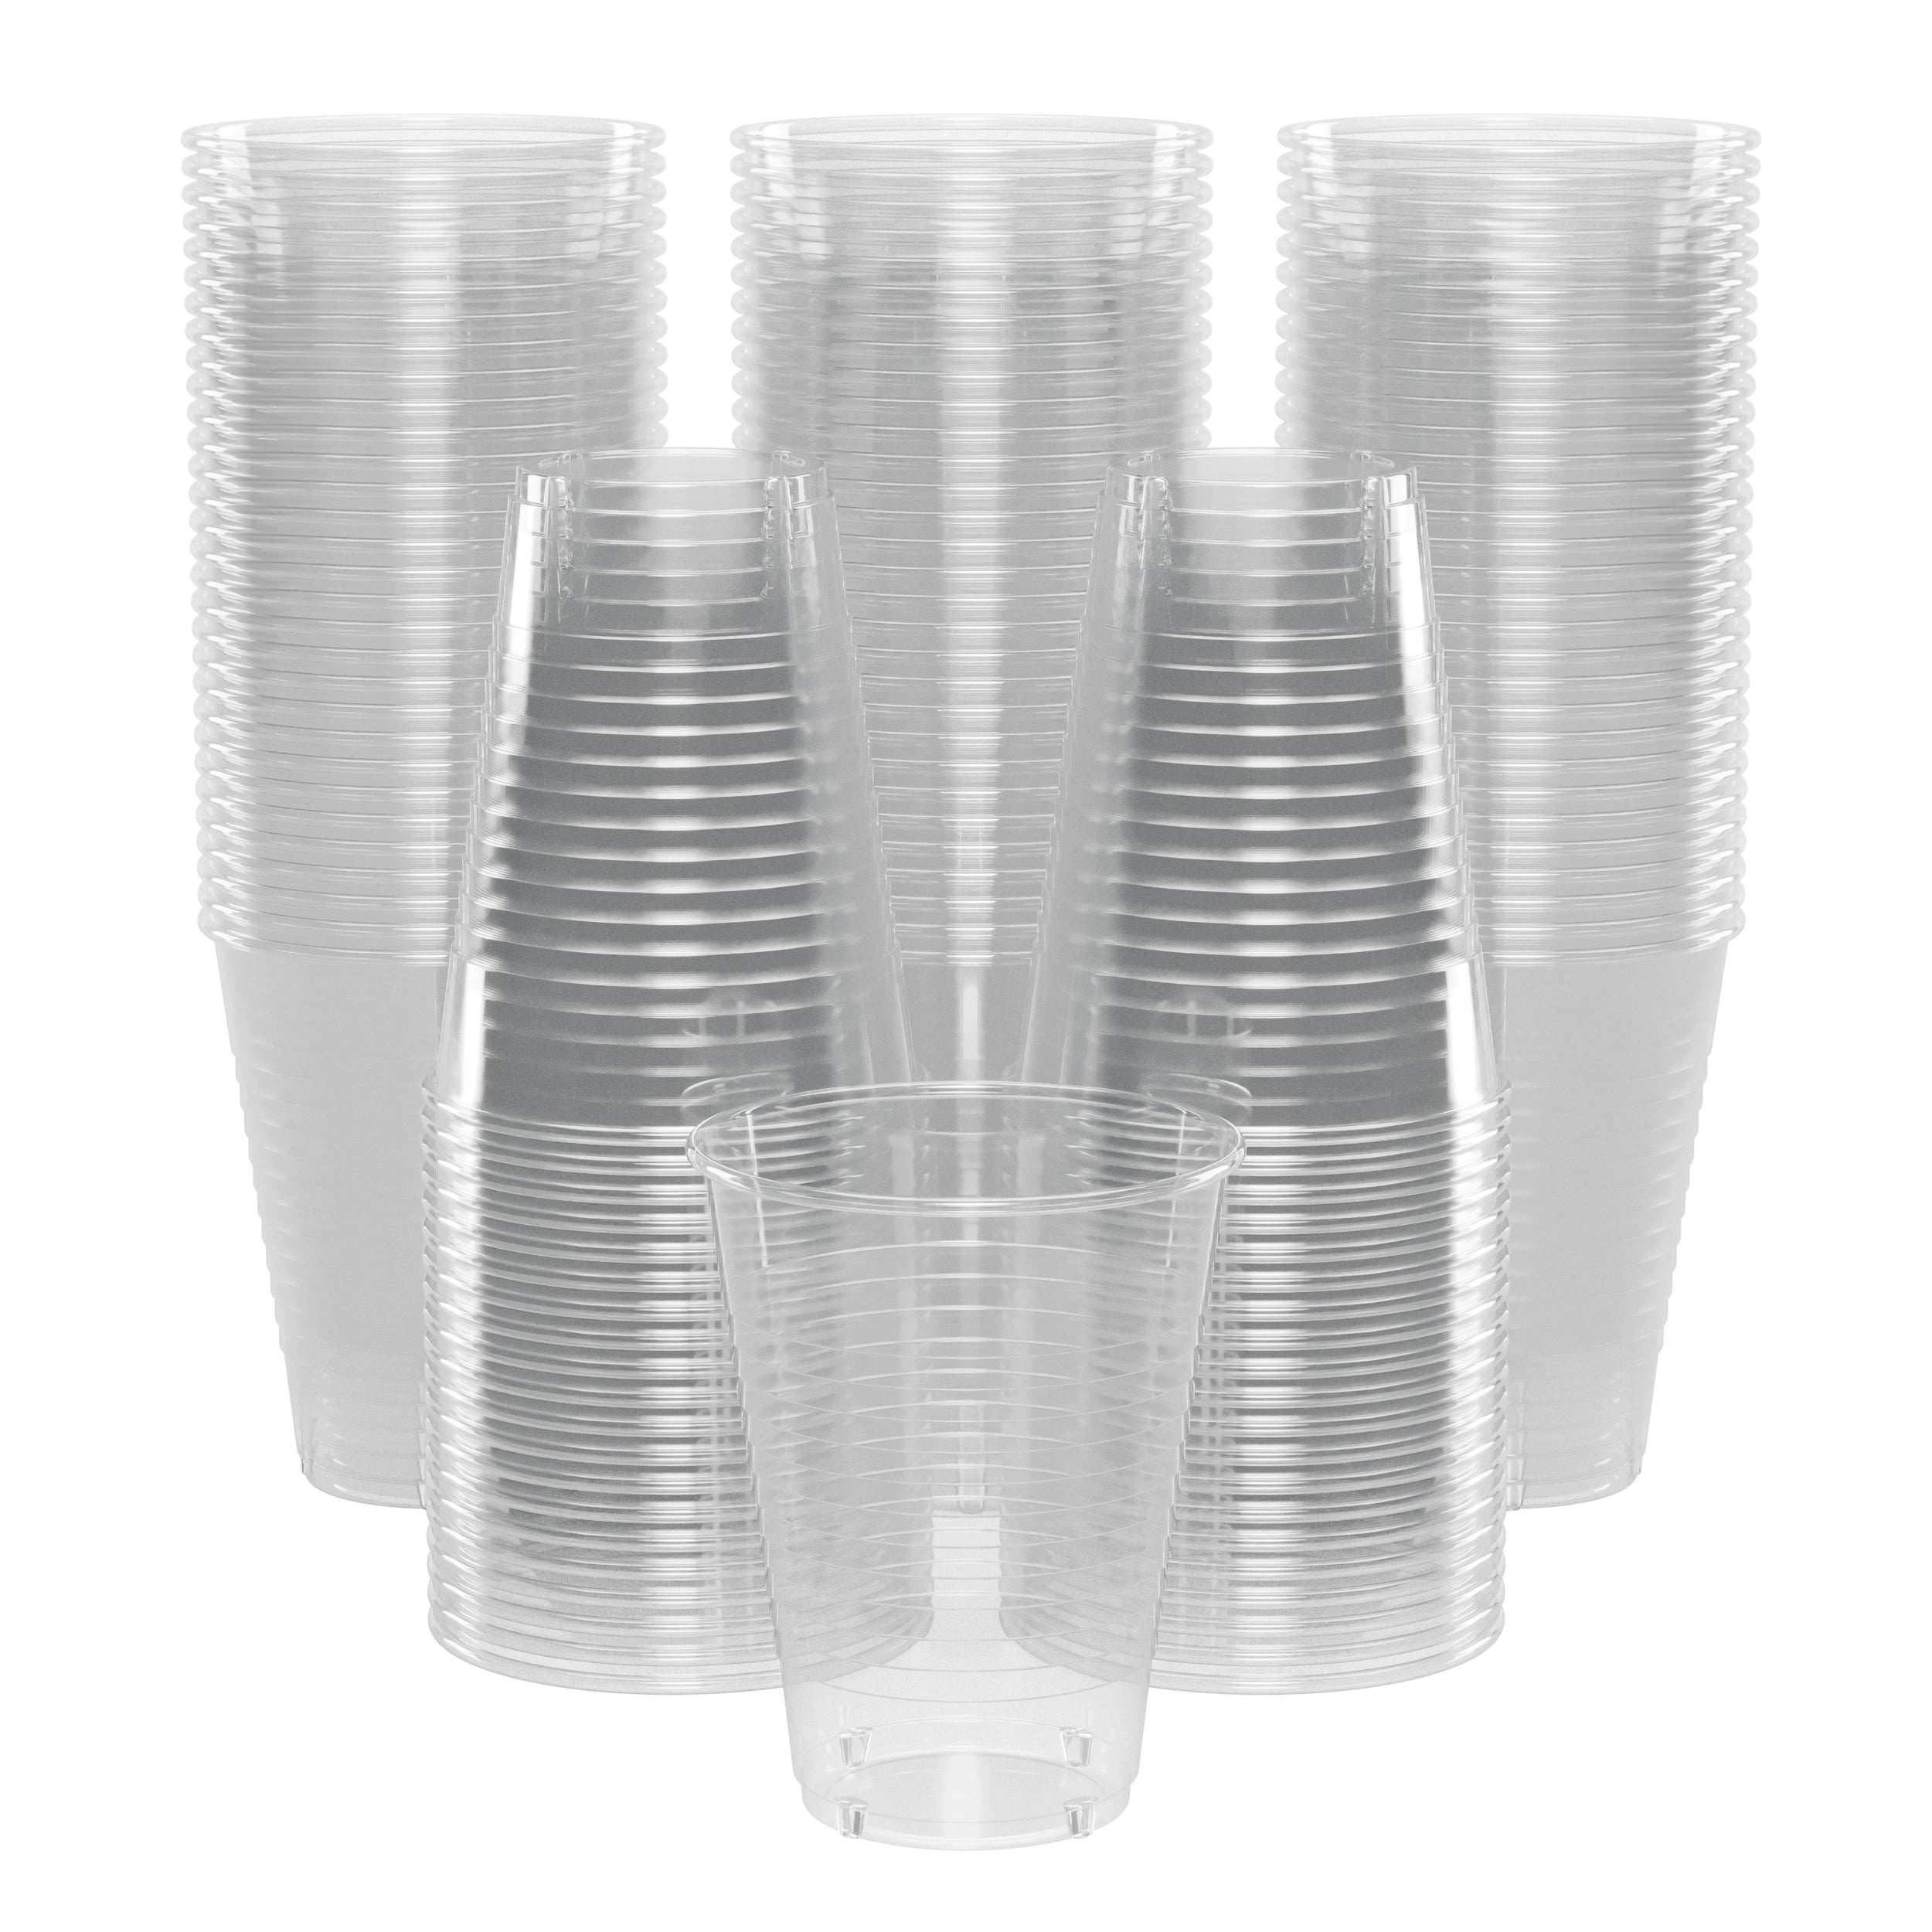 100 Pk 16 oz Clear Plastic Cups, Blue Rimmed Disposable Cups